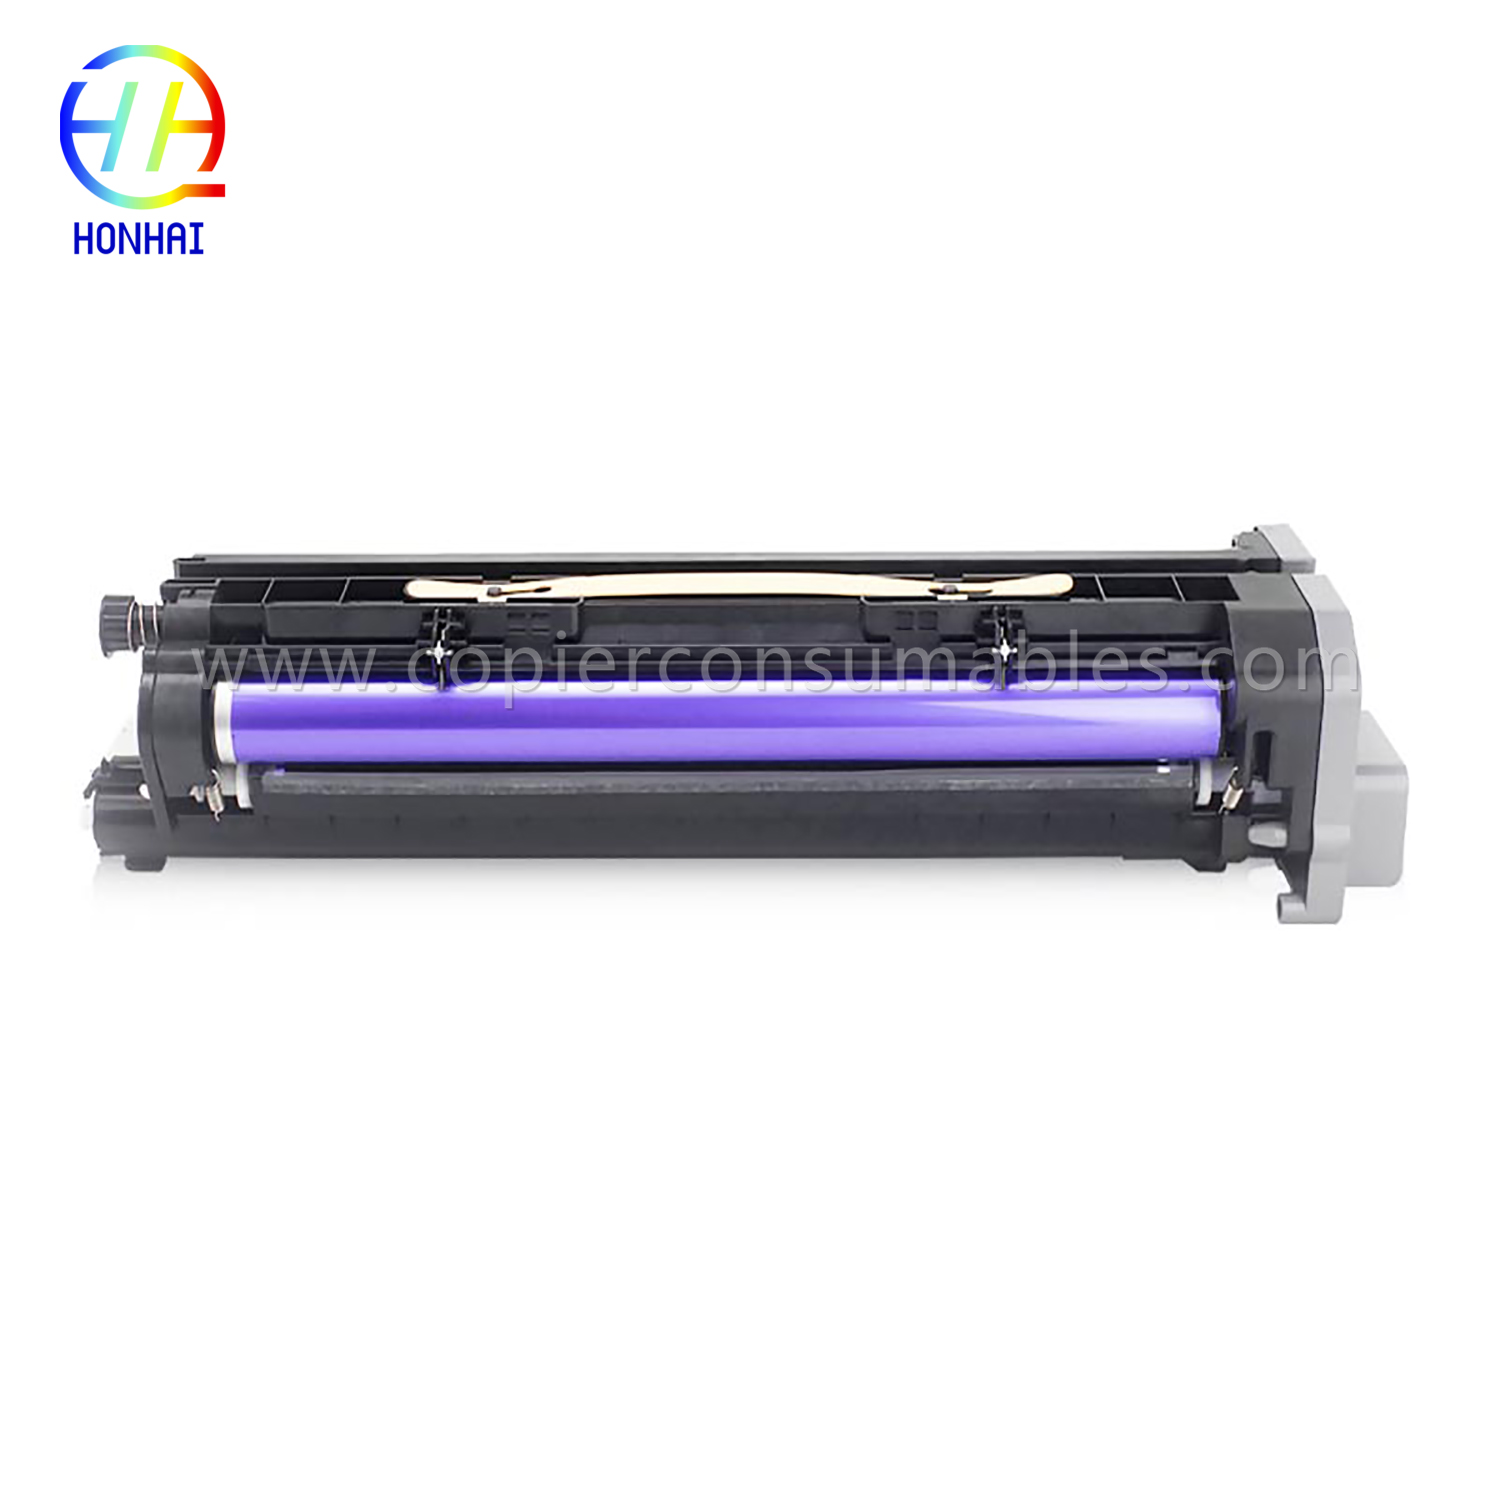 Drum Unit for Xerox Dcc2060 Wc5330 Wc5335 Wc5220 (2) 拷贝